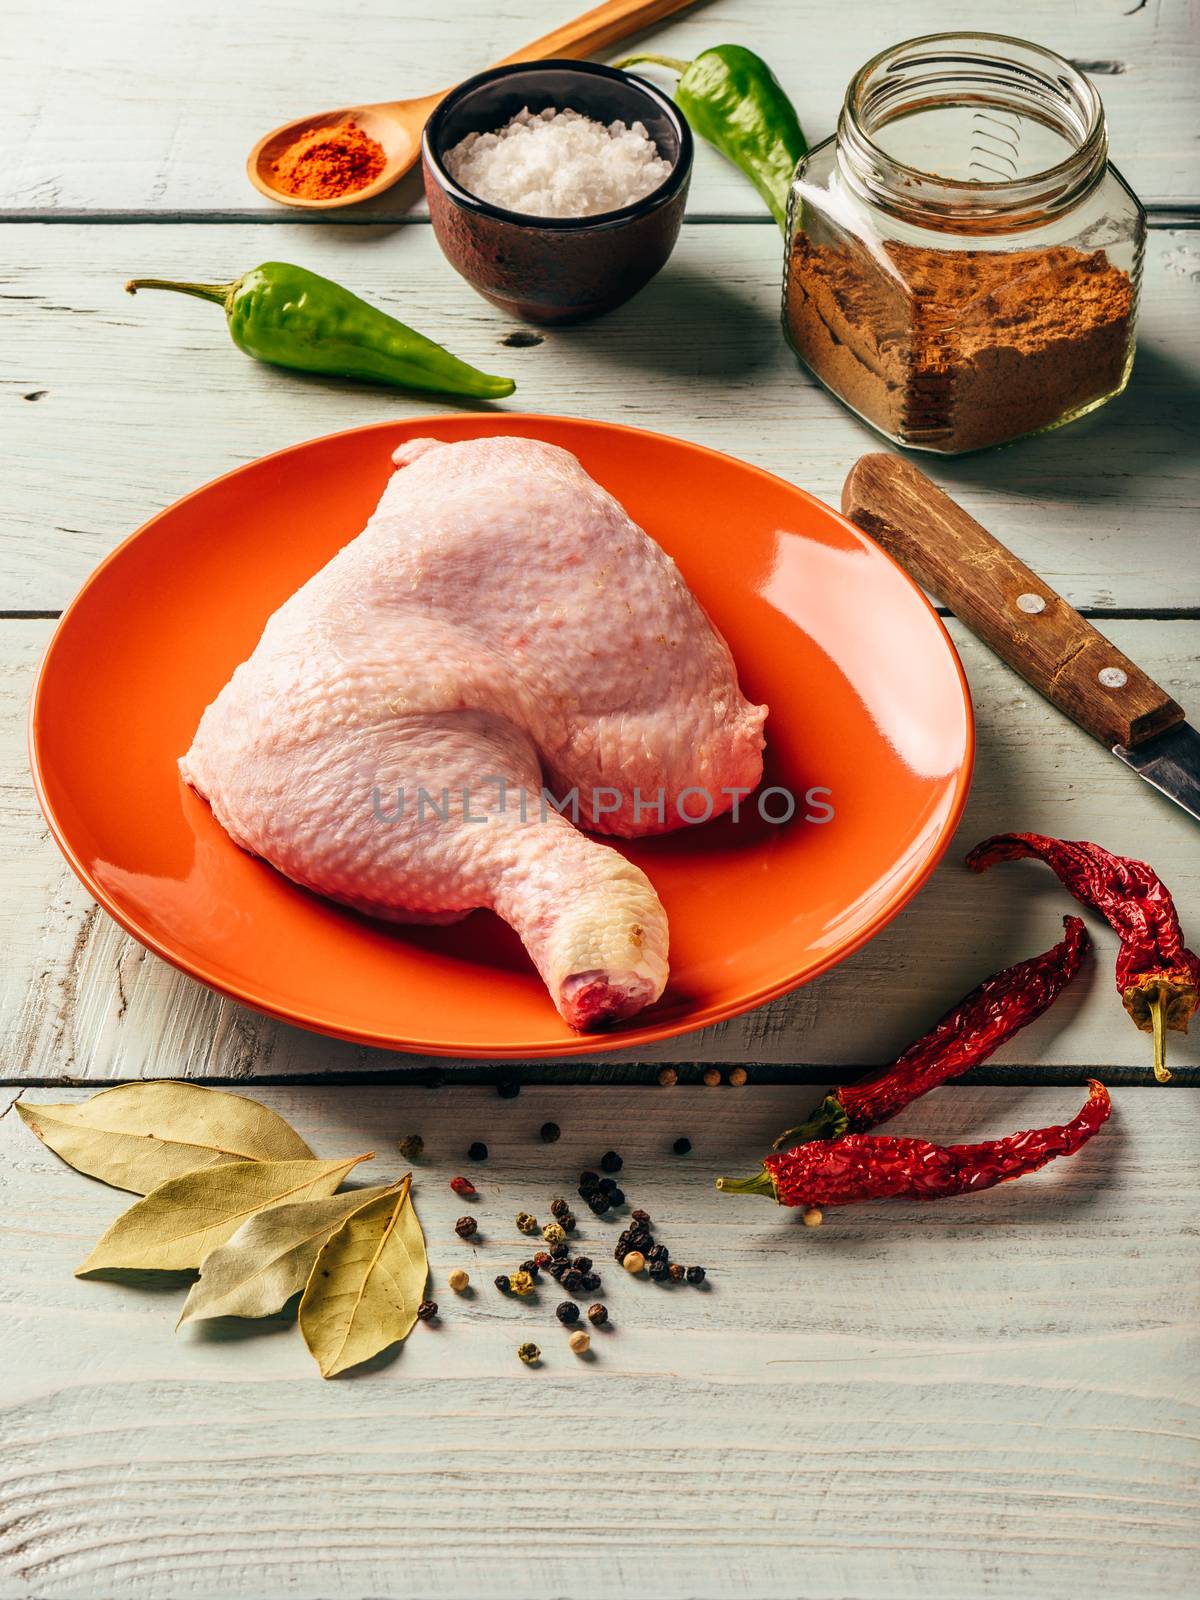 chicken leg quarter on plate with different spices by Seva_blsv